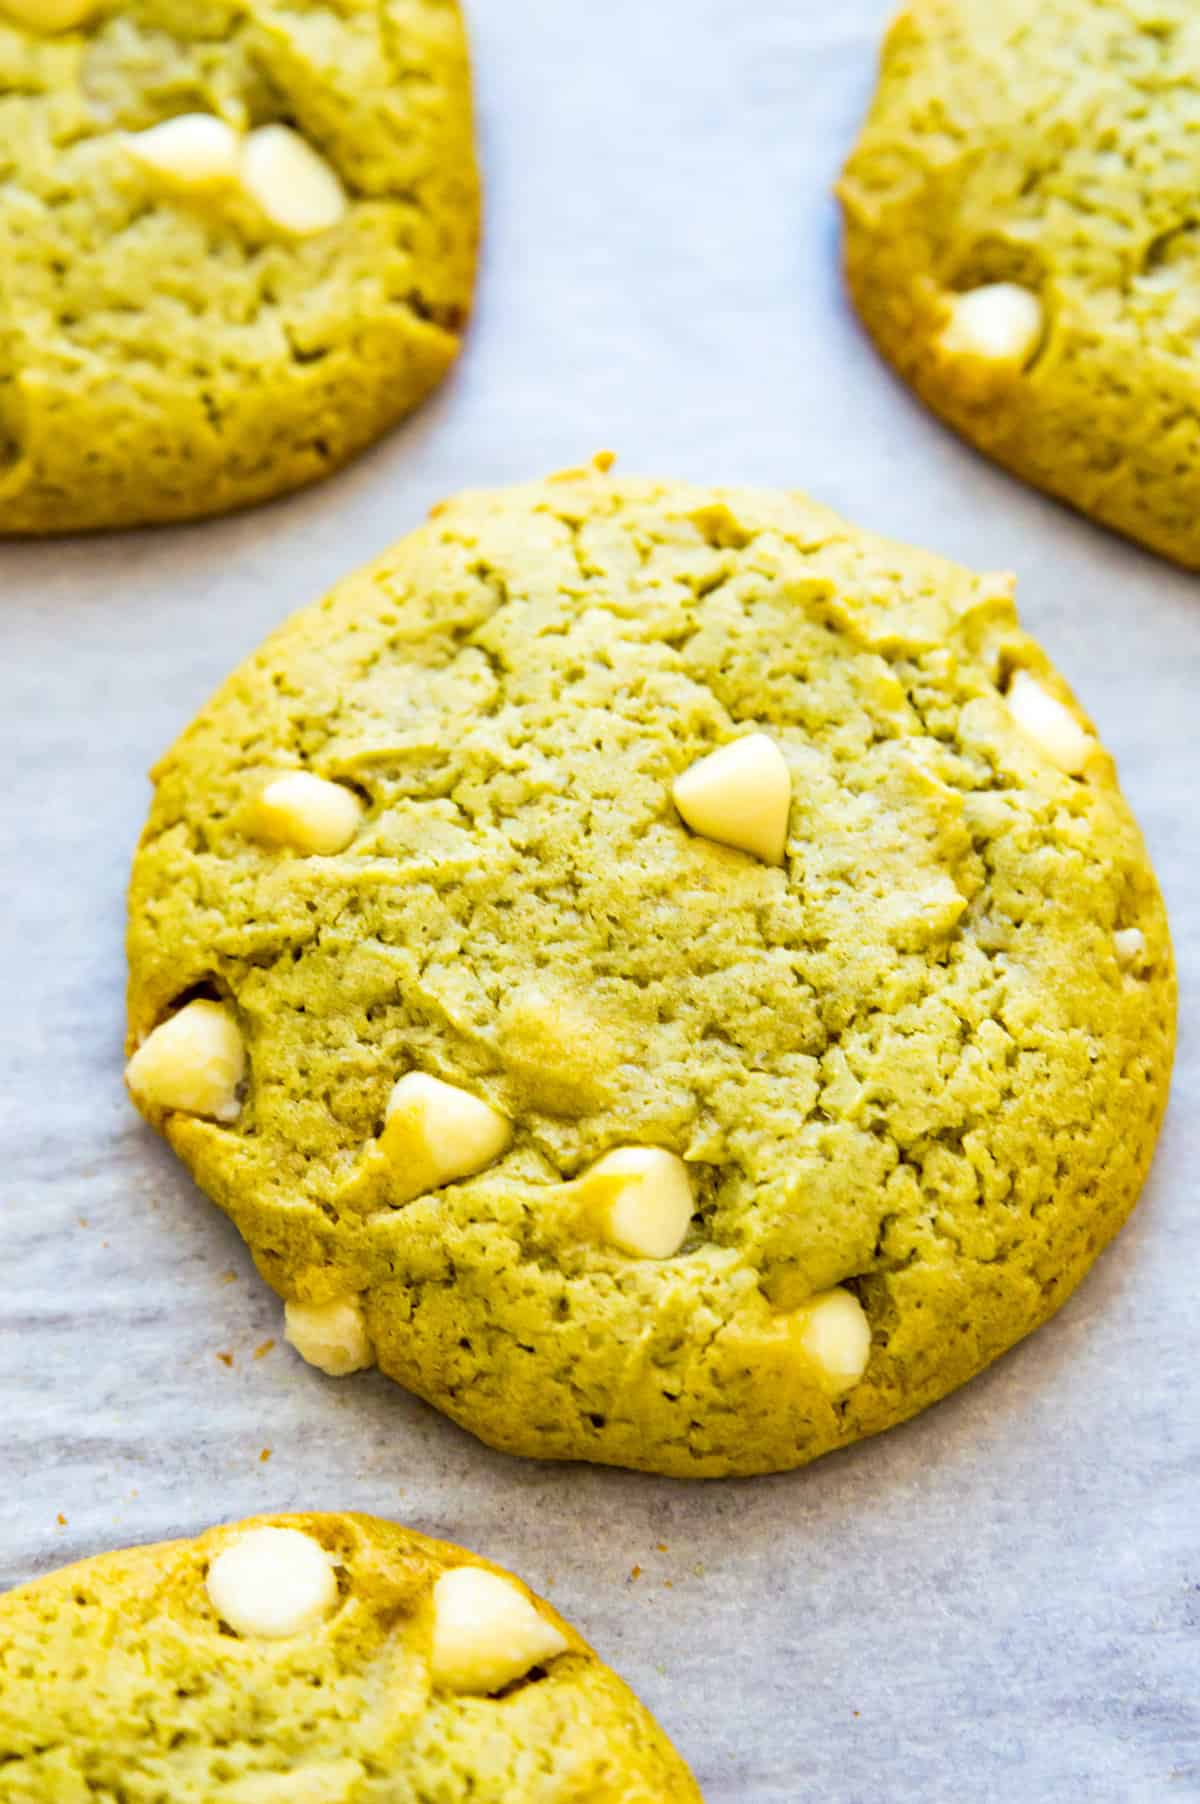 Green tea cookies with white chocolate chips on a baking sheet.